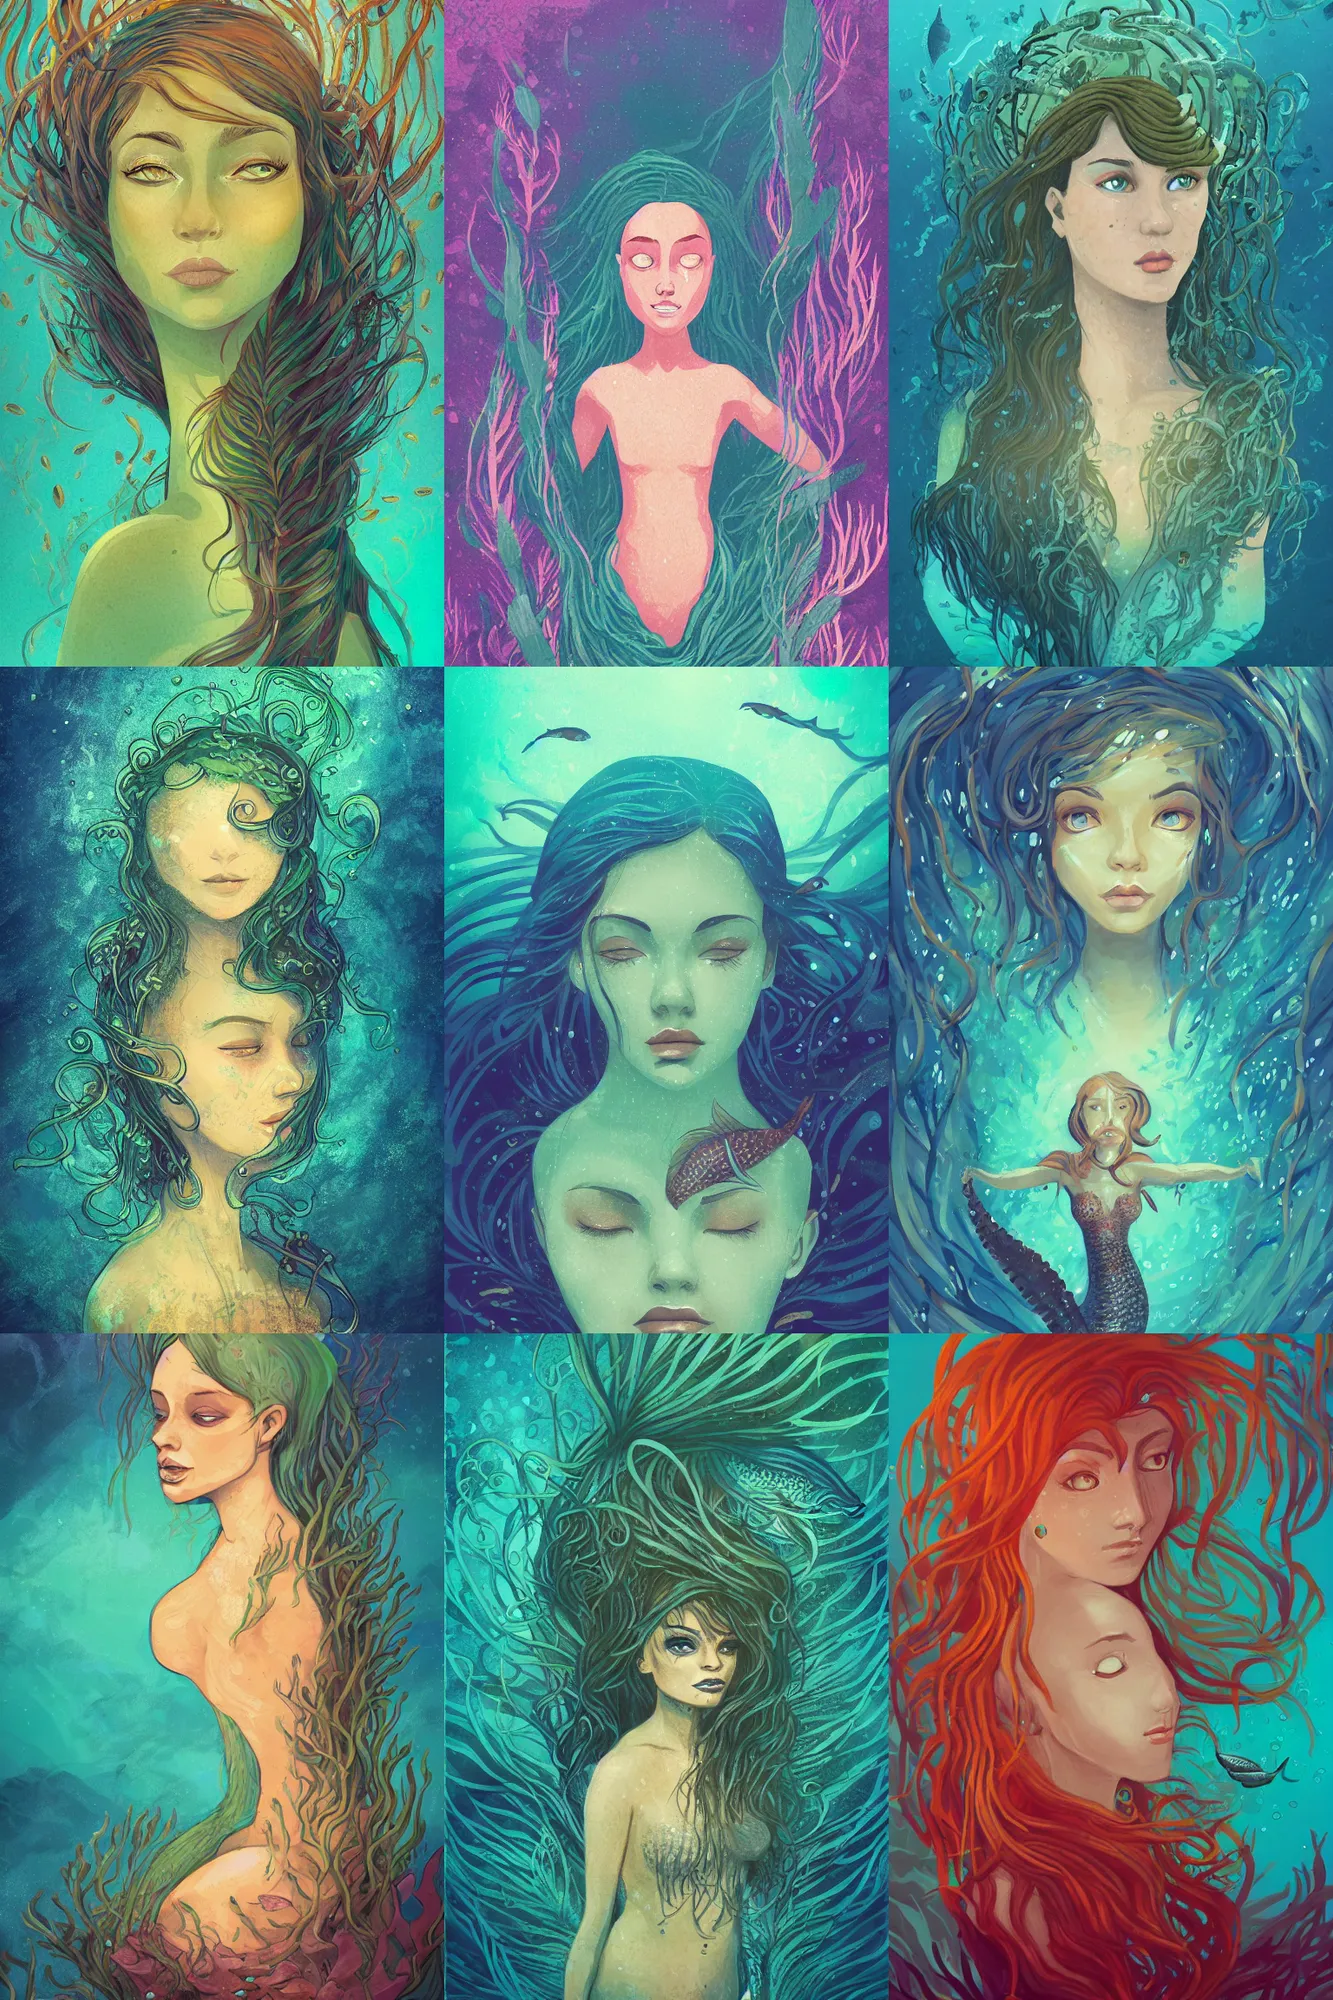 Prompt: head and shoulder portrait illustration of a mermaid under the sea, surrounded by thick kelp, many small tropical fish, art by Anato Finnstark